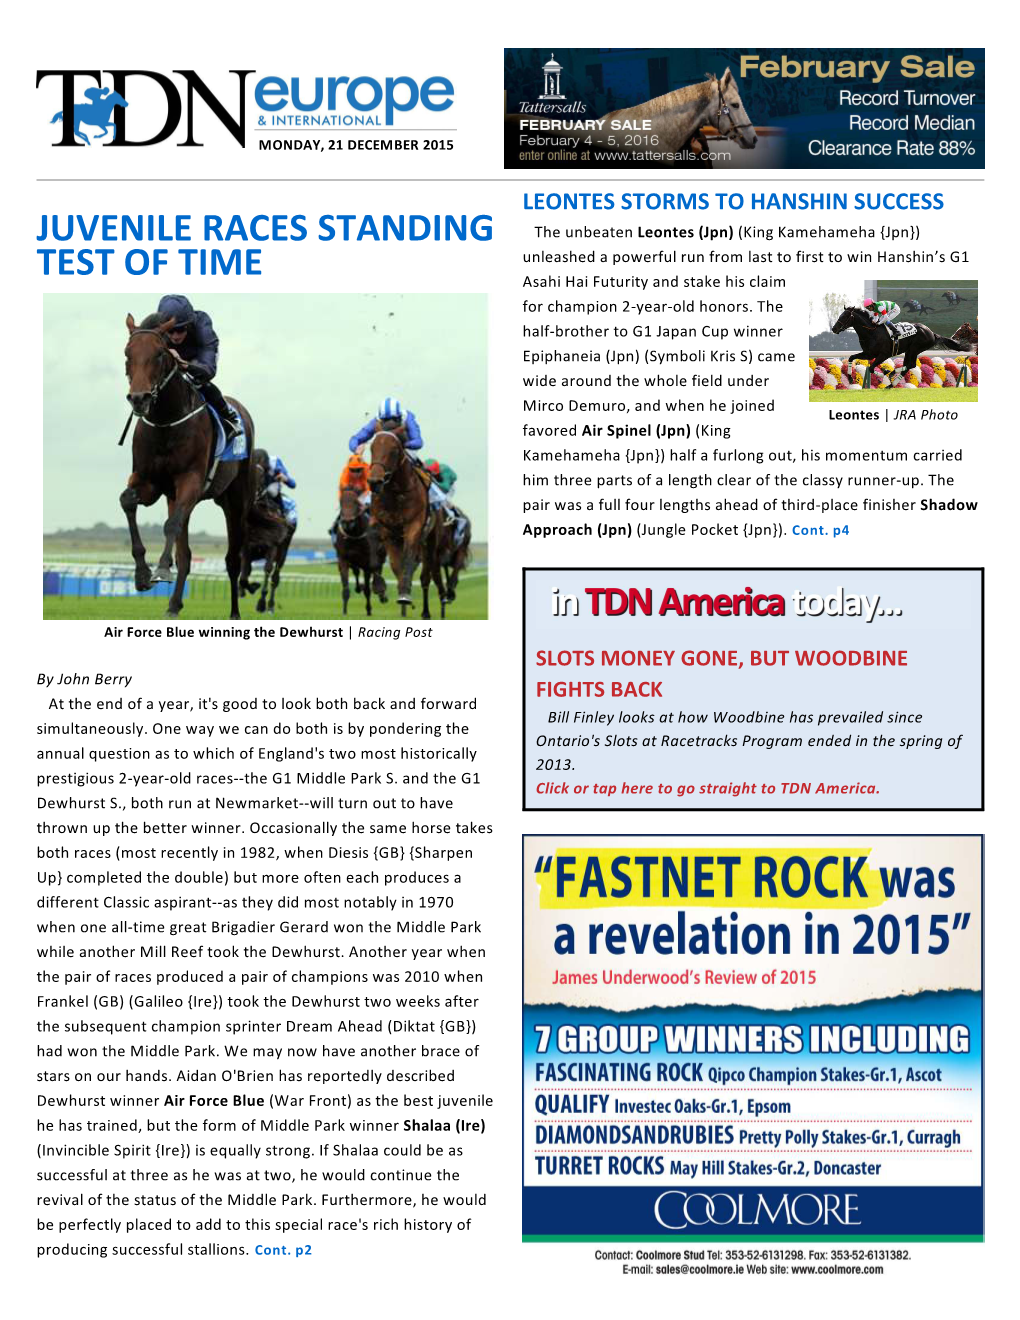 JUVENILE RACES STANDING TEST of TIME by Bill Finley John Berry Takes a Look Back at the History of Two of Britain's Woodbine’S Darkest Hour Occurred on Mar